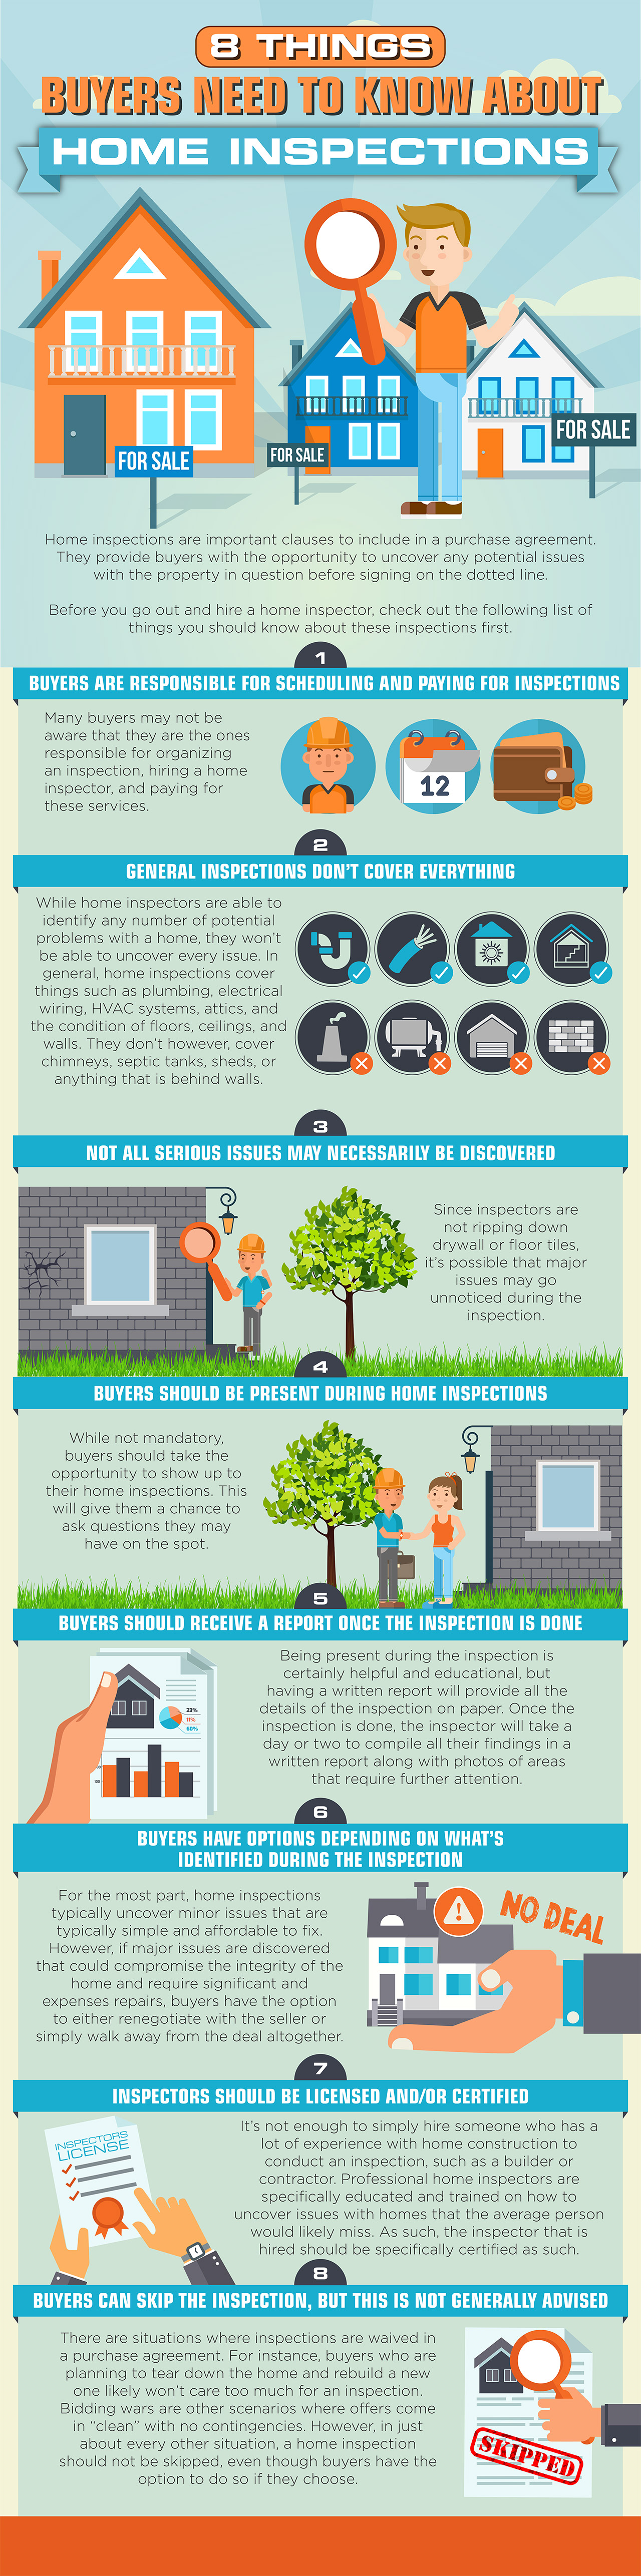 8-things-buyers-need-to-know-about-home-inspections-infographic